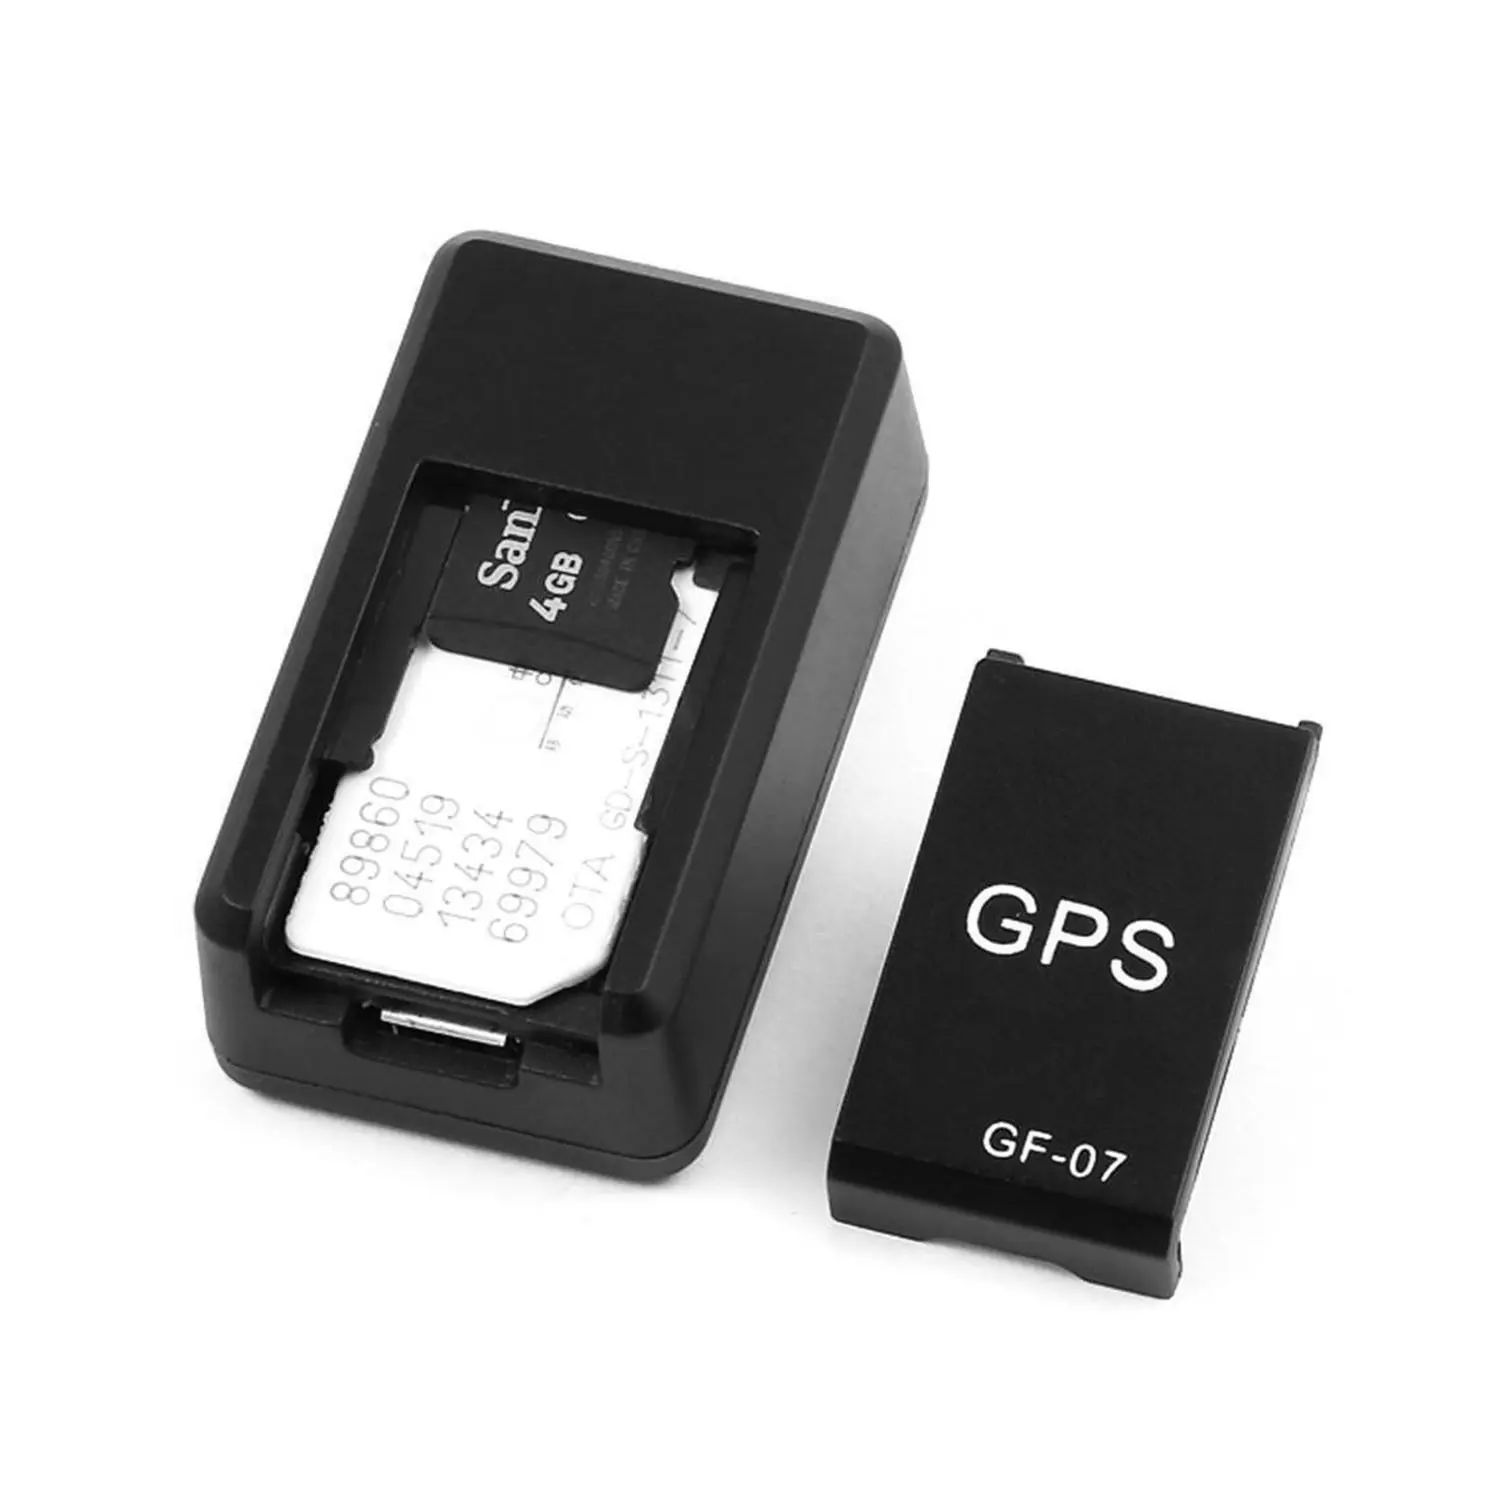 Hot selling locator elderly and children anti-lost device strong magnetic installation-free GPS car tracker